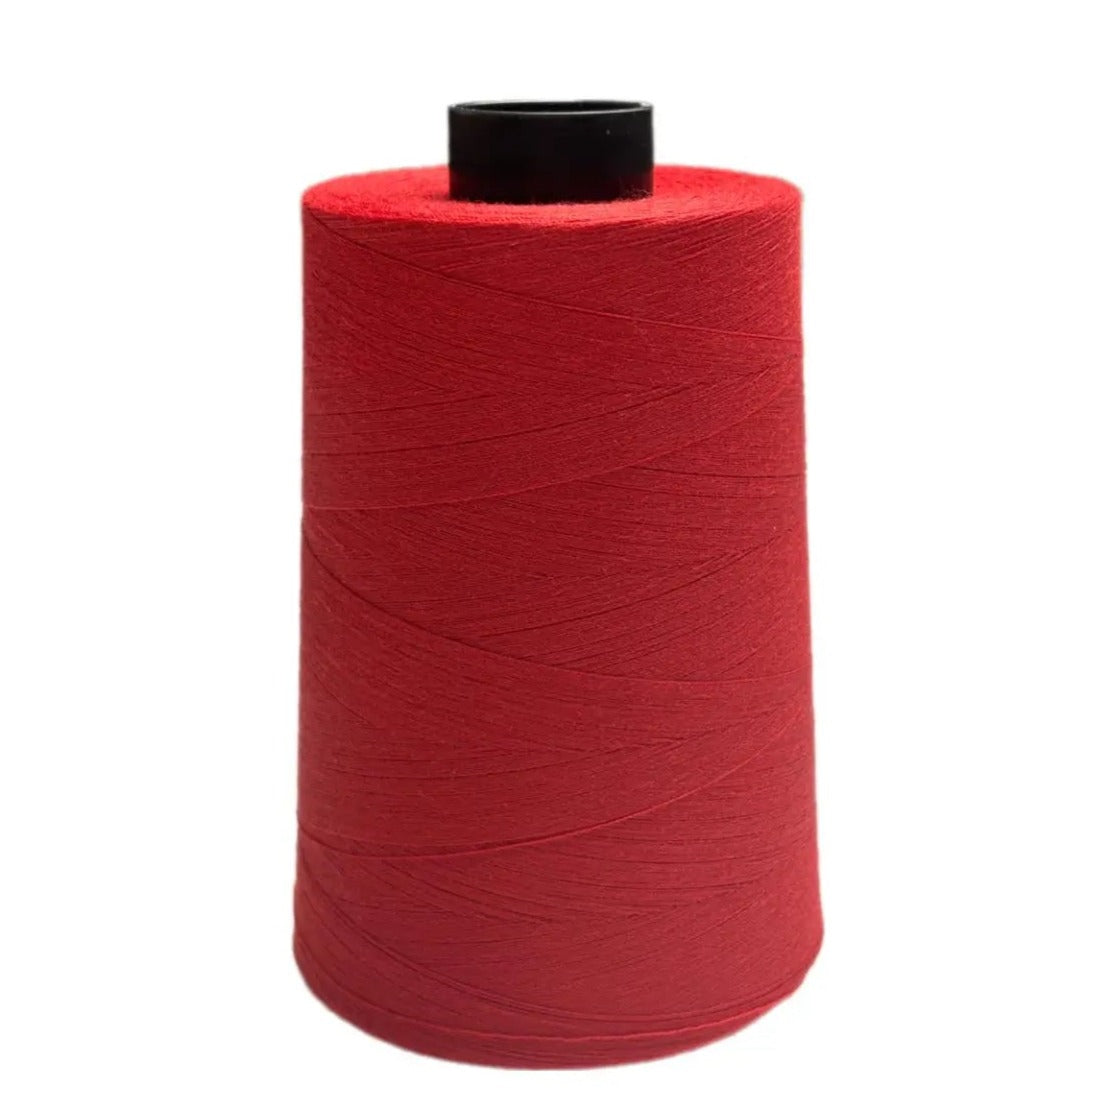 W32744 Red Perma Core Tex 30 Polyester Thread American & Efird Permacore